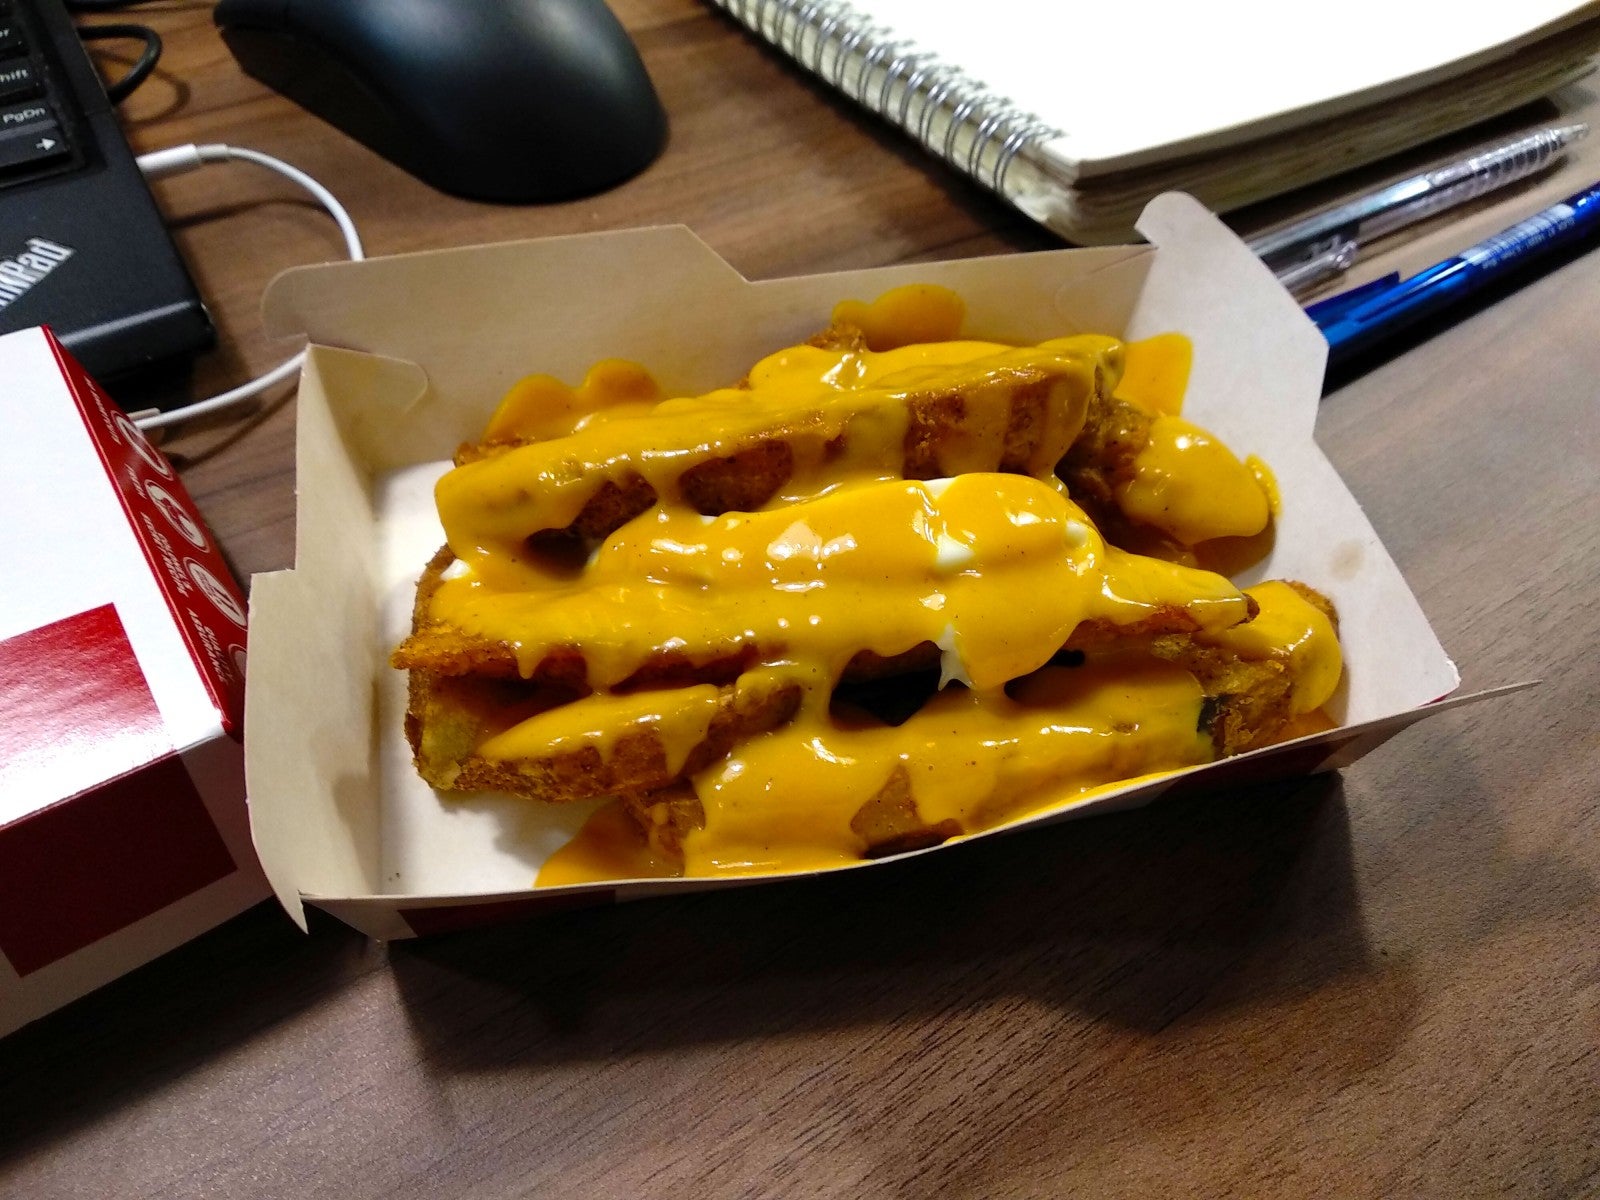 [TEST] M'sians Can Now Claim FREE Cheezy Wedges from KFC Delivery via Their App! - WORLD OF BUZZ 11